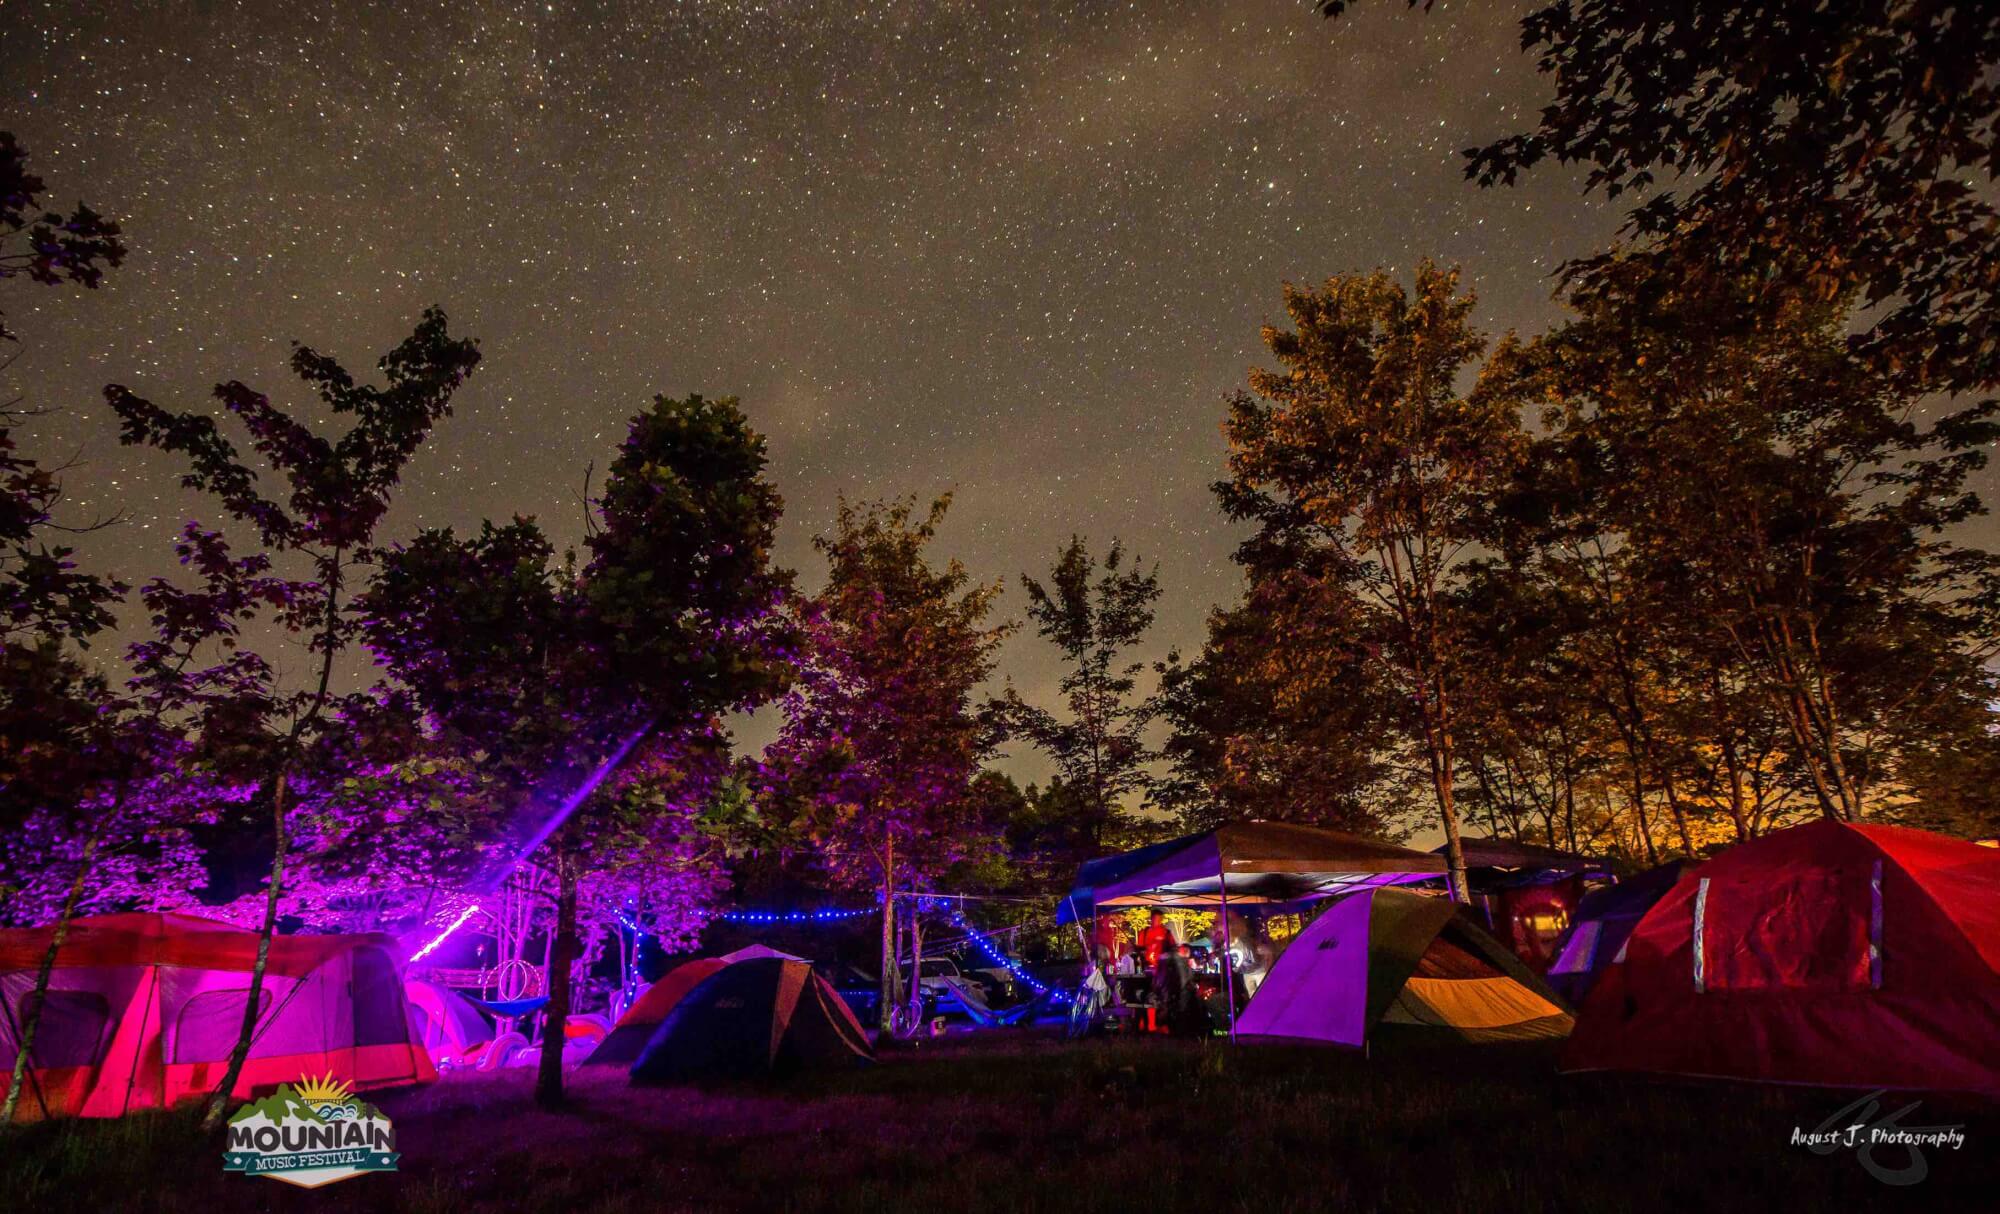 Geniet Beoefend Vul in 5 Festival Camping Tips - Mountain Music Festival